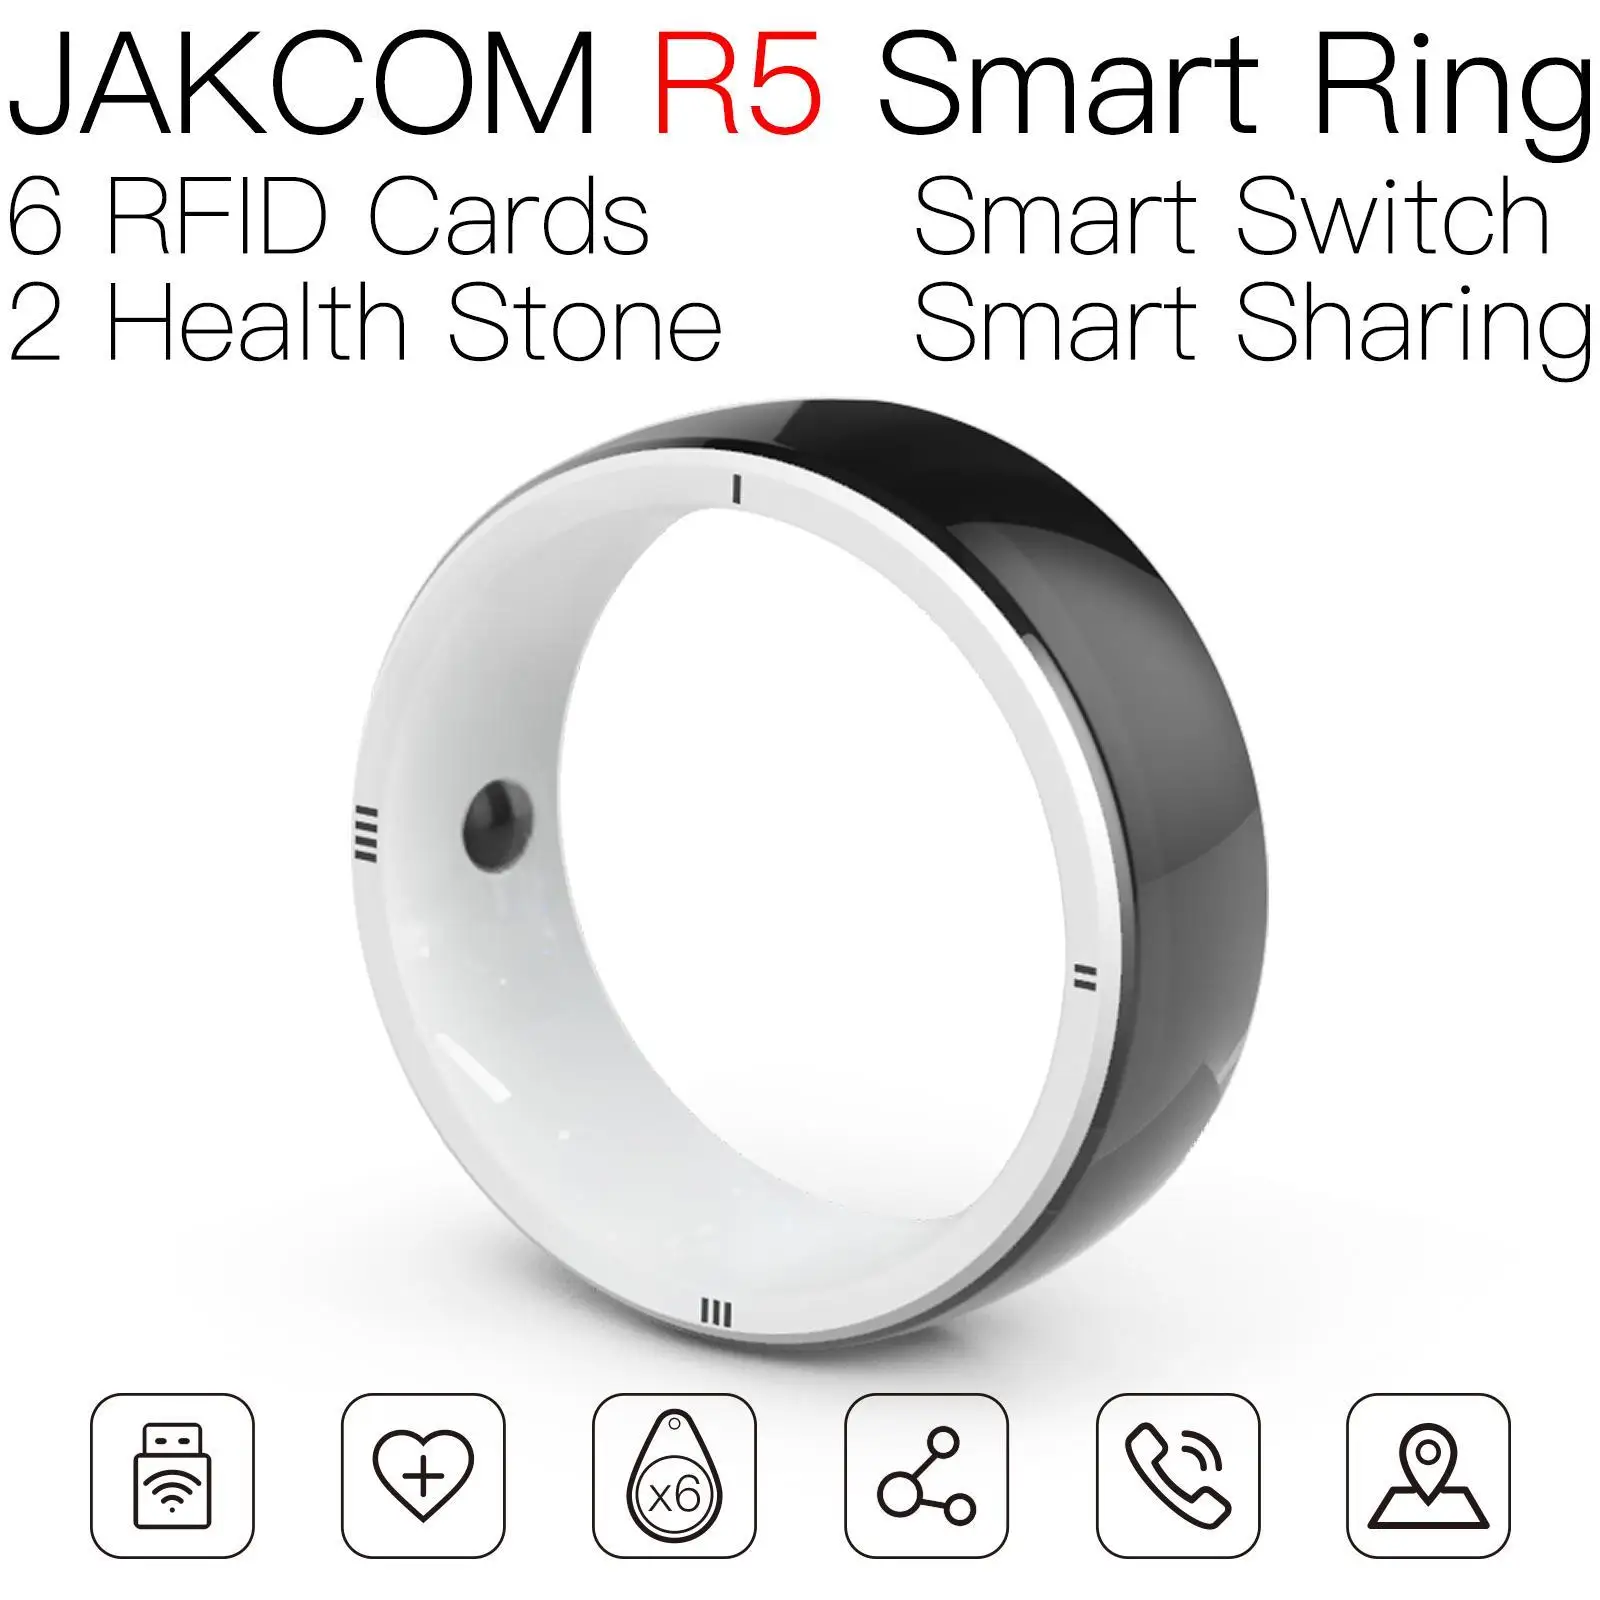 

JAKCOM R5 Smart Ring Newer than card pack rewritable copiable clone duplicate copy white proximity em4305 t5577 access control